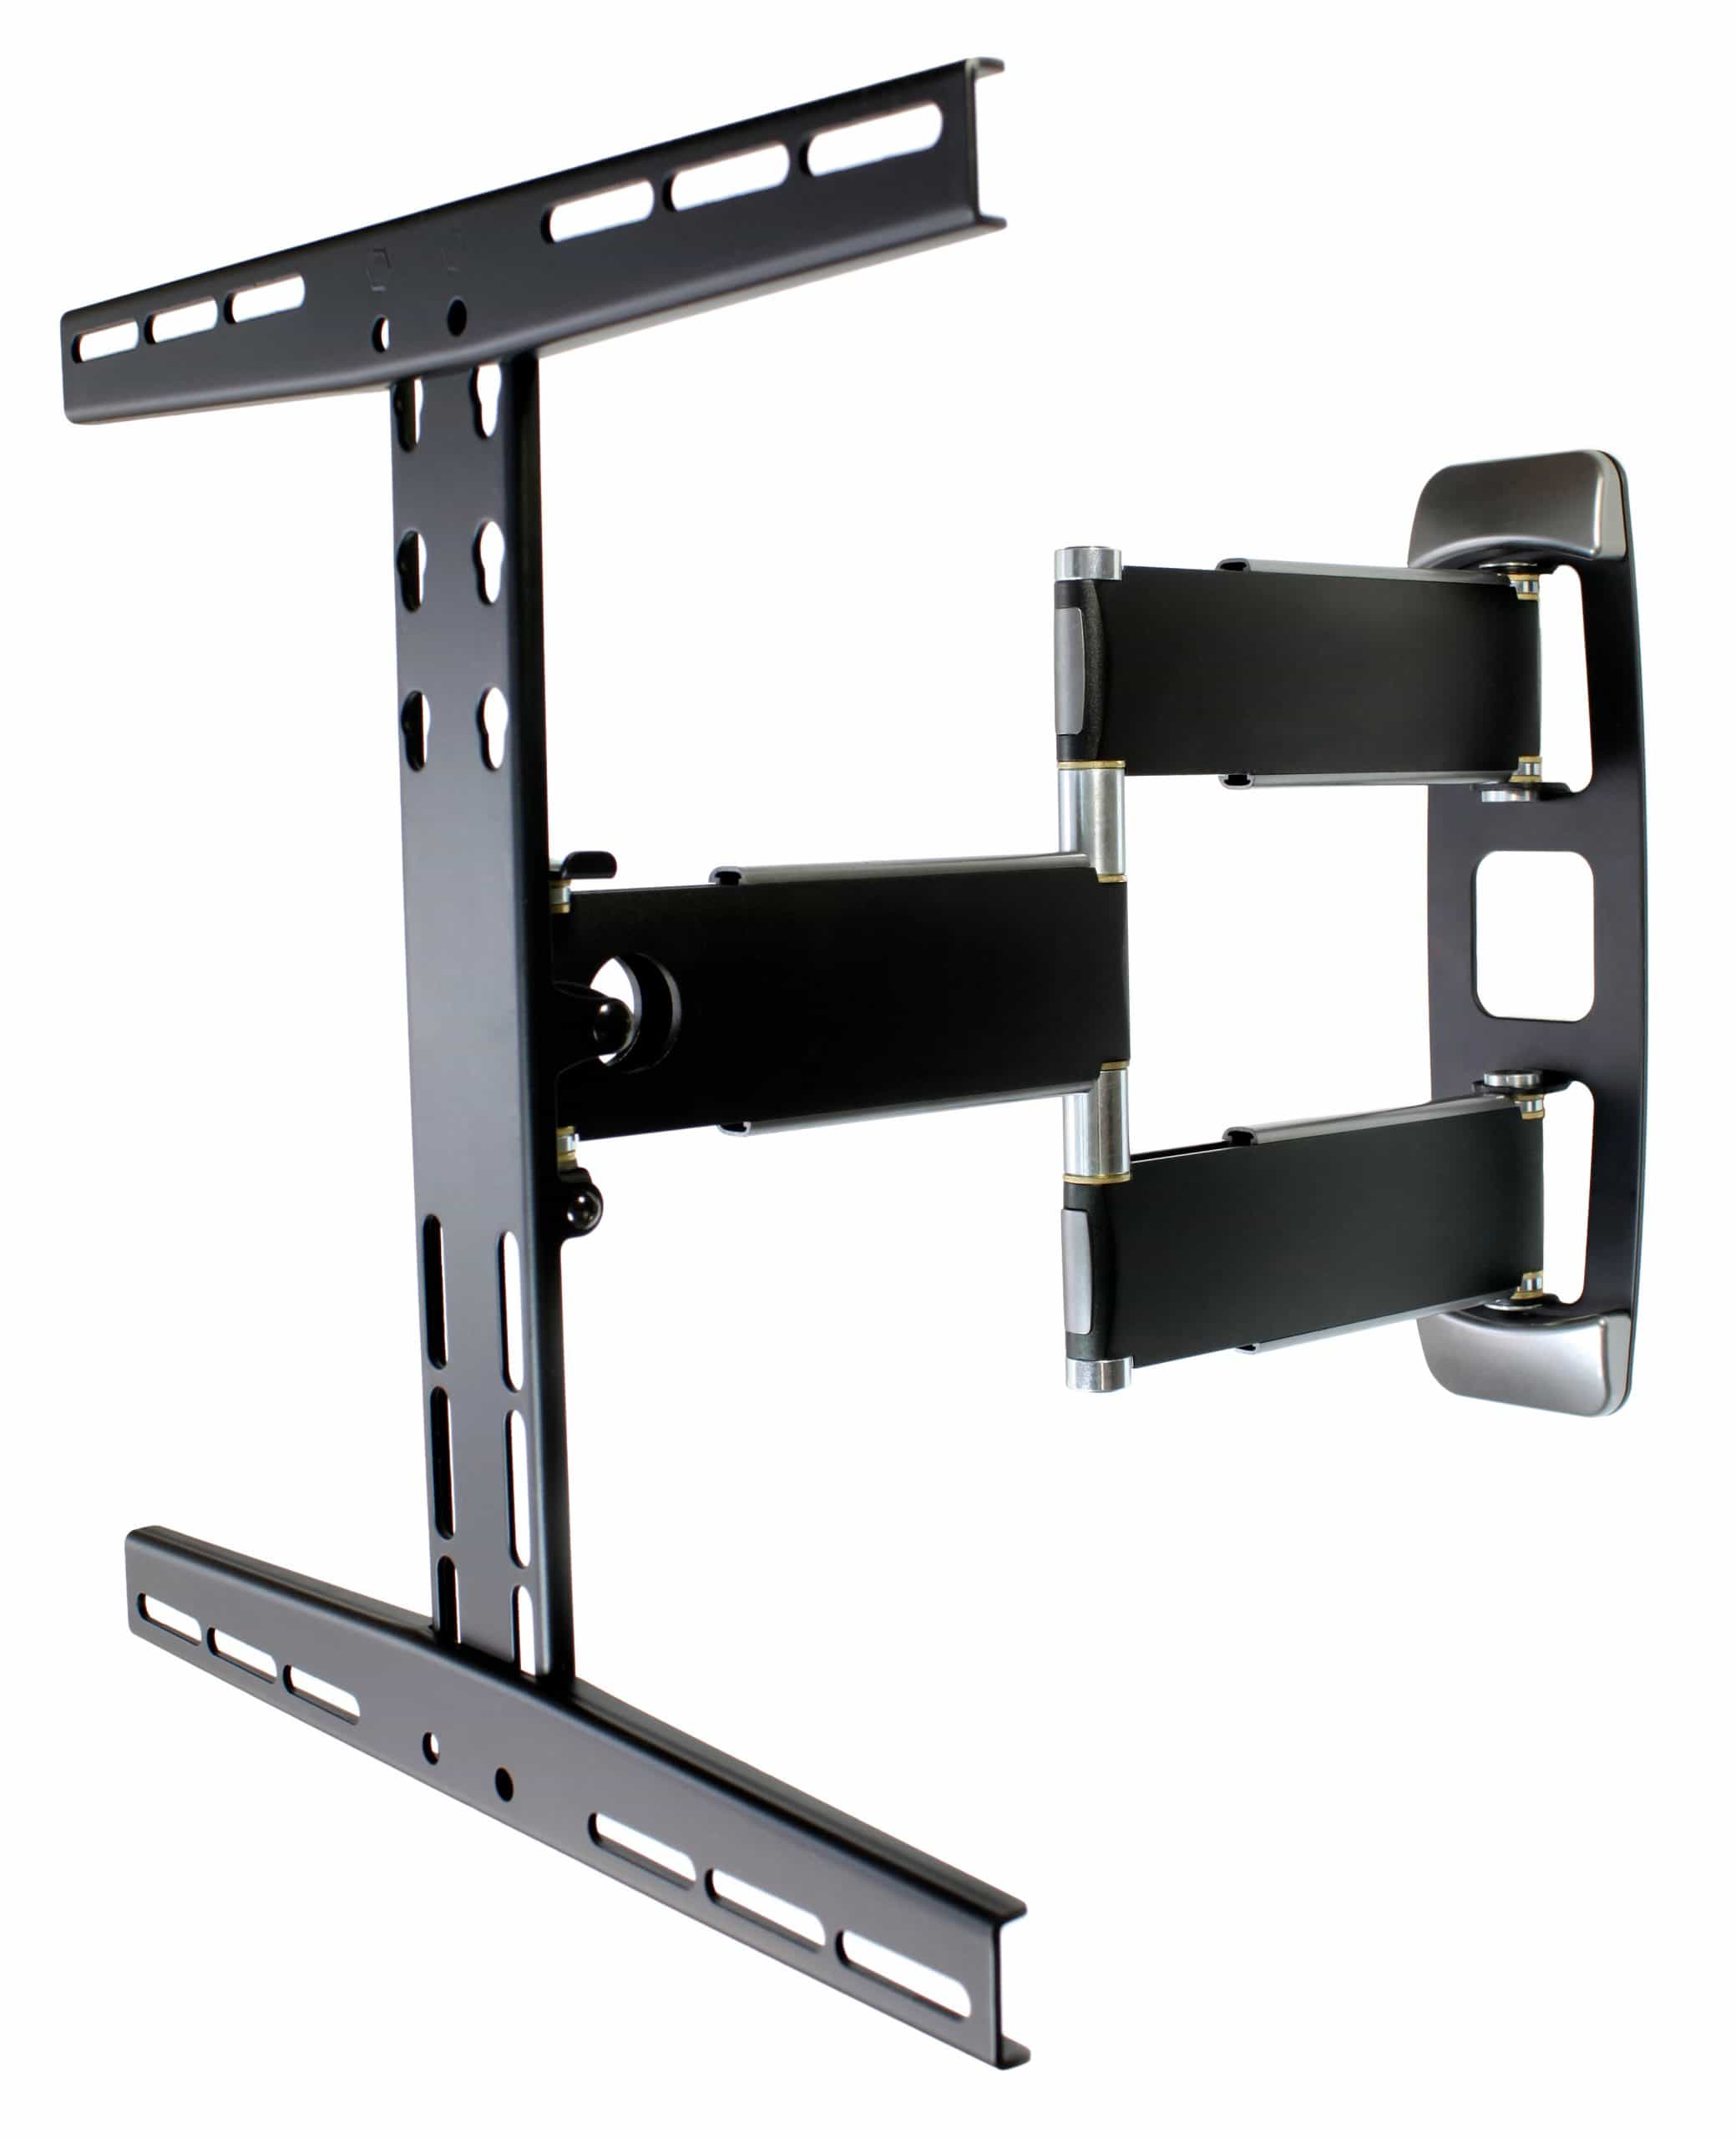 ProMounts Articulating / Full Motion TV Wall Mount For 30″ to 60″ TVs, Holds Up to 80lbs (SAM)